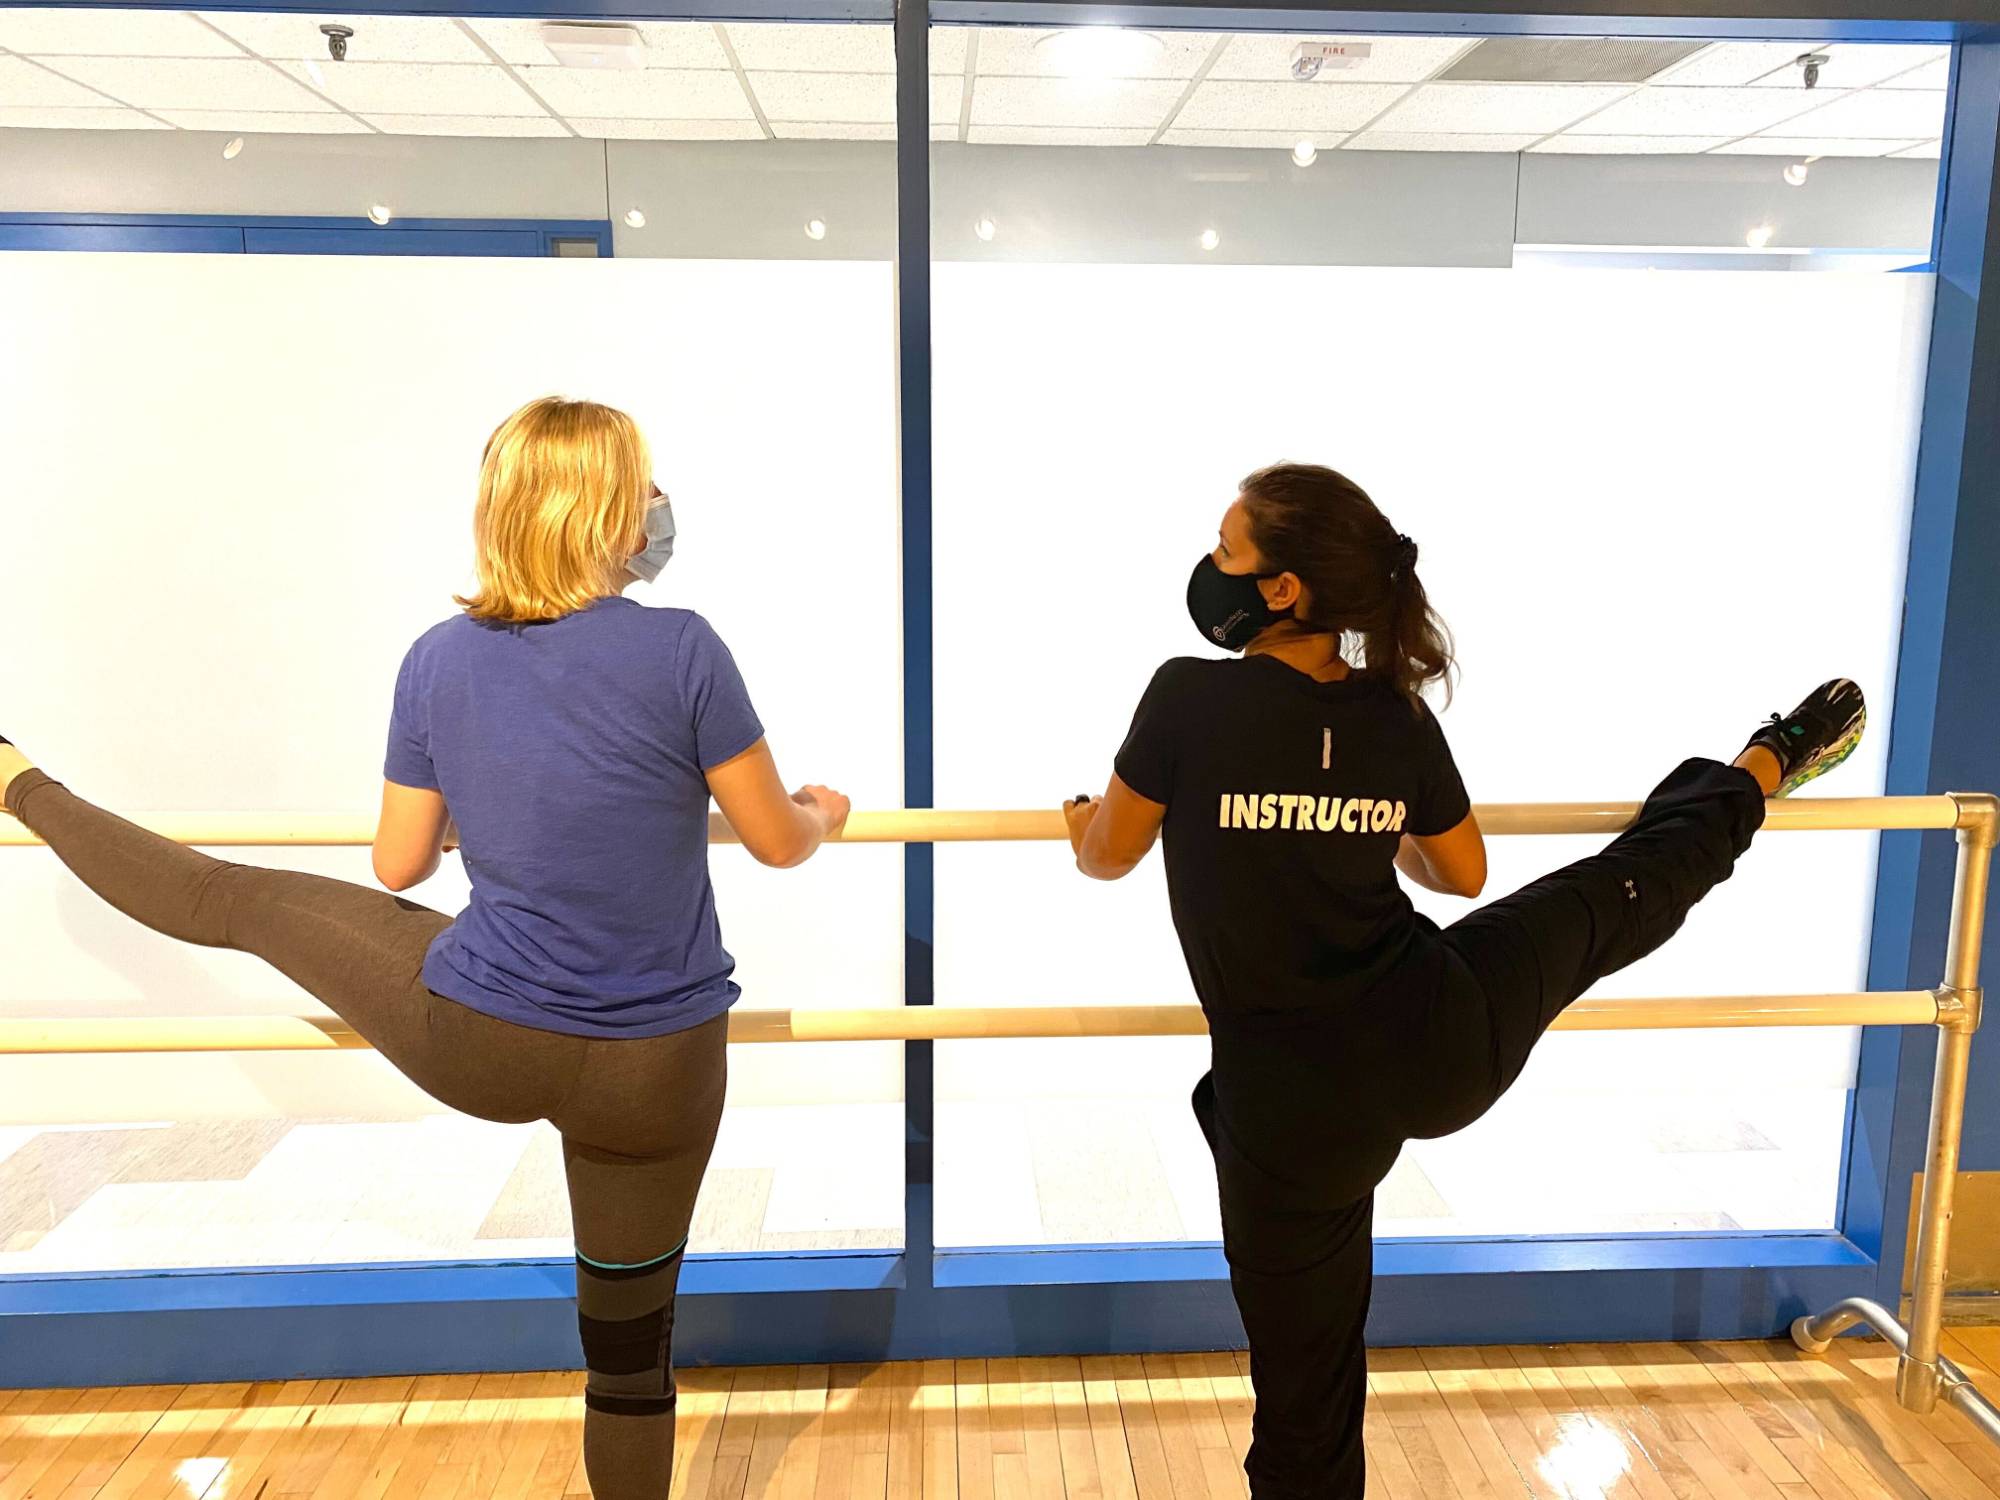 Instructor and student working together at the barre.